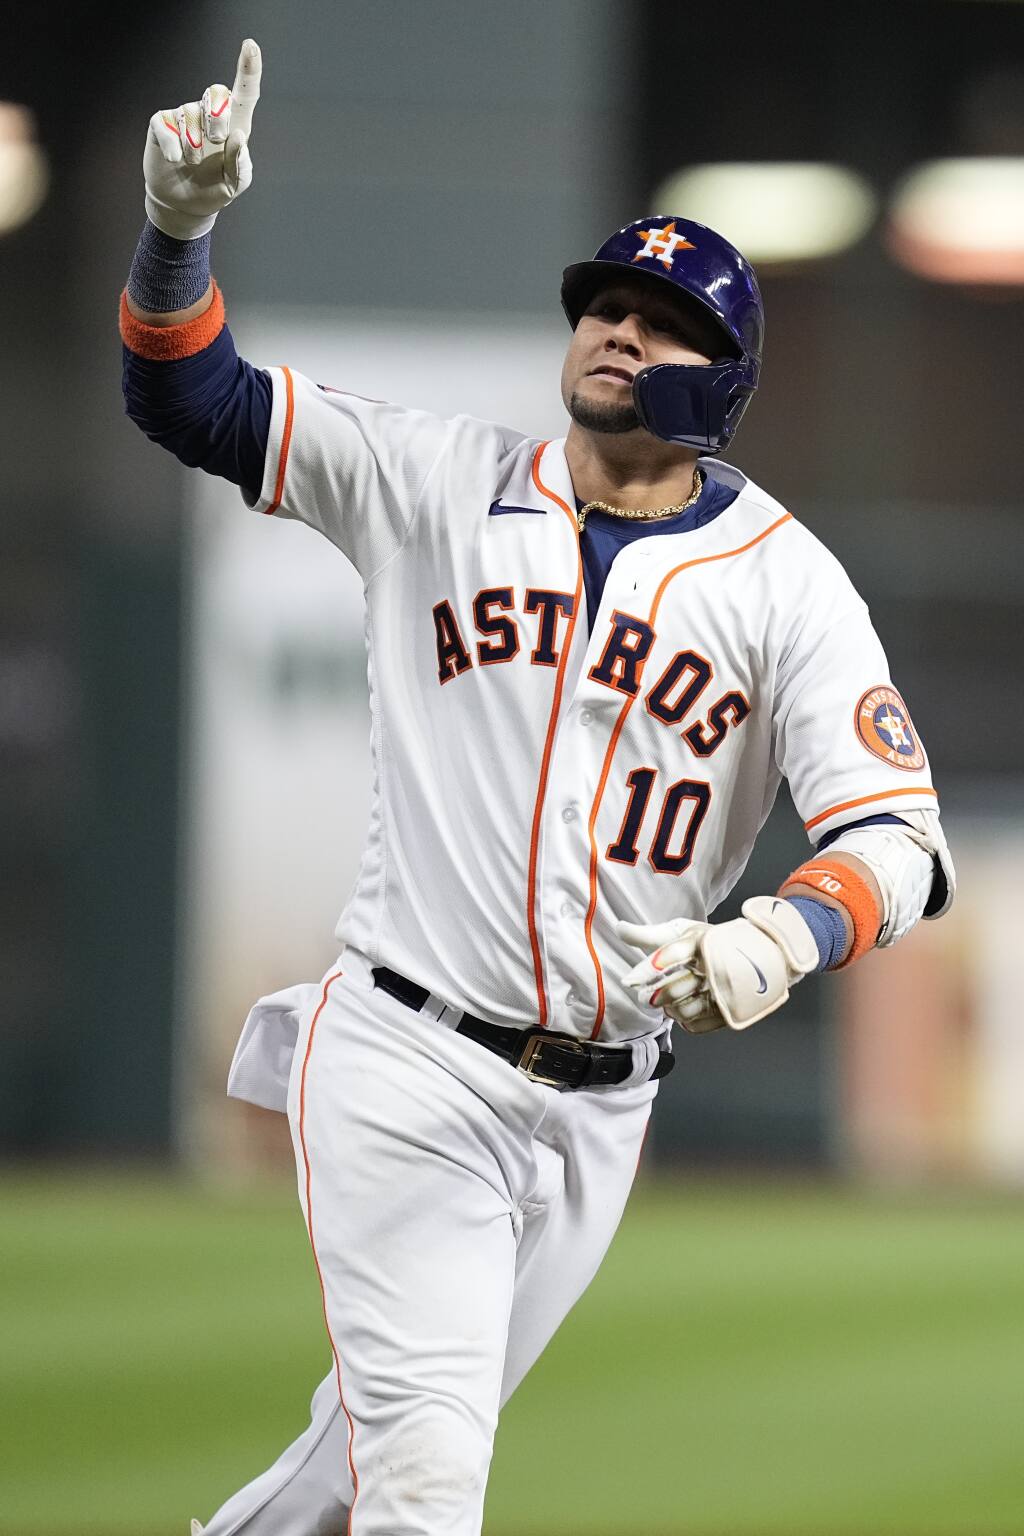 11 Players Will Make More Than Entire Houston Astros Roster in 2013